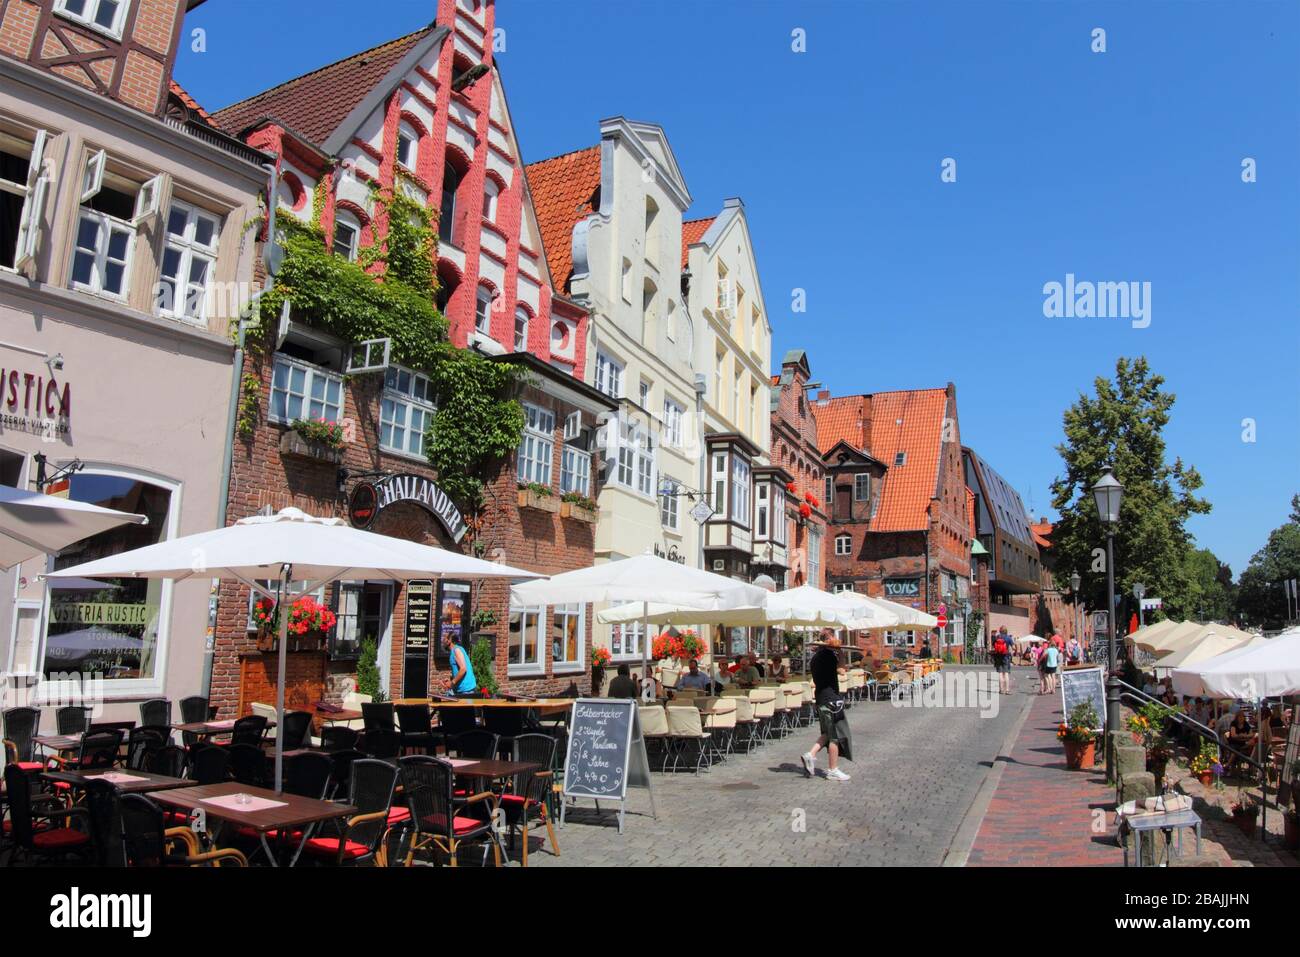 Lüneburg, Germany – 23. July 2013: Cafes and restaraunts in Lüneburg's old town. The street name is 'Stintmarkt' in the “Wasser-Viertel” district. The Stock Photo